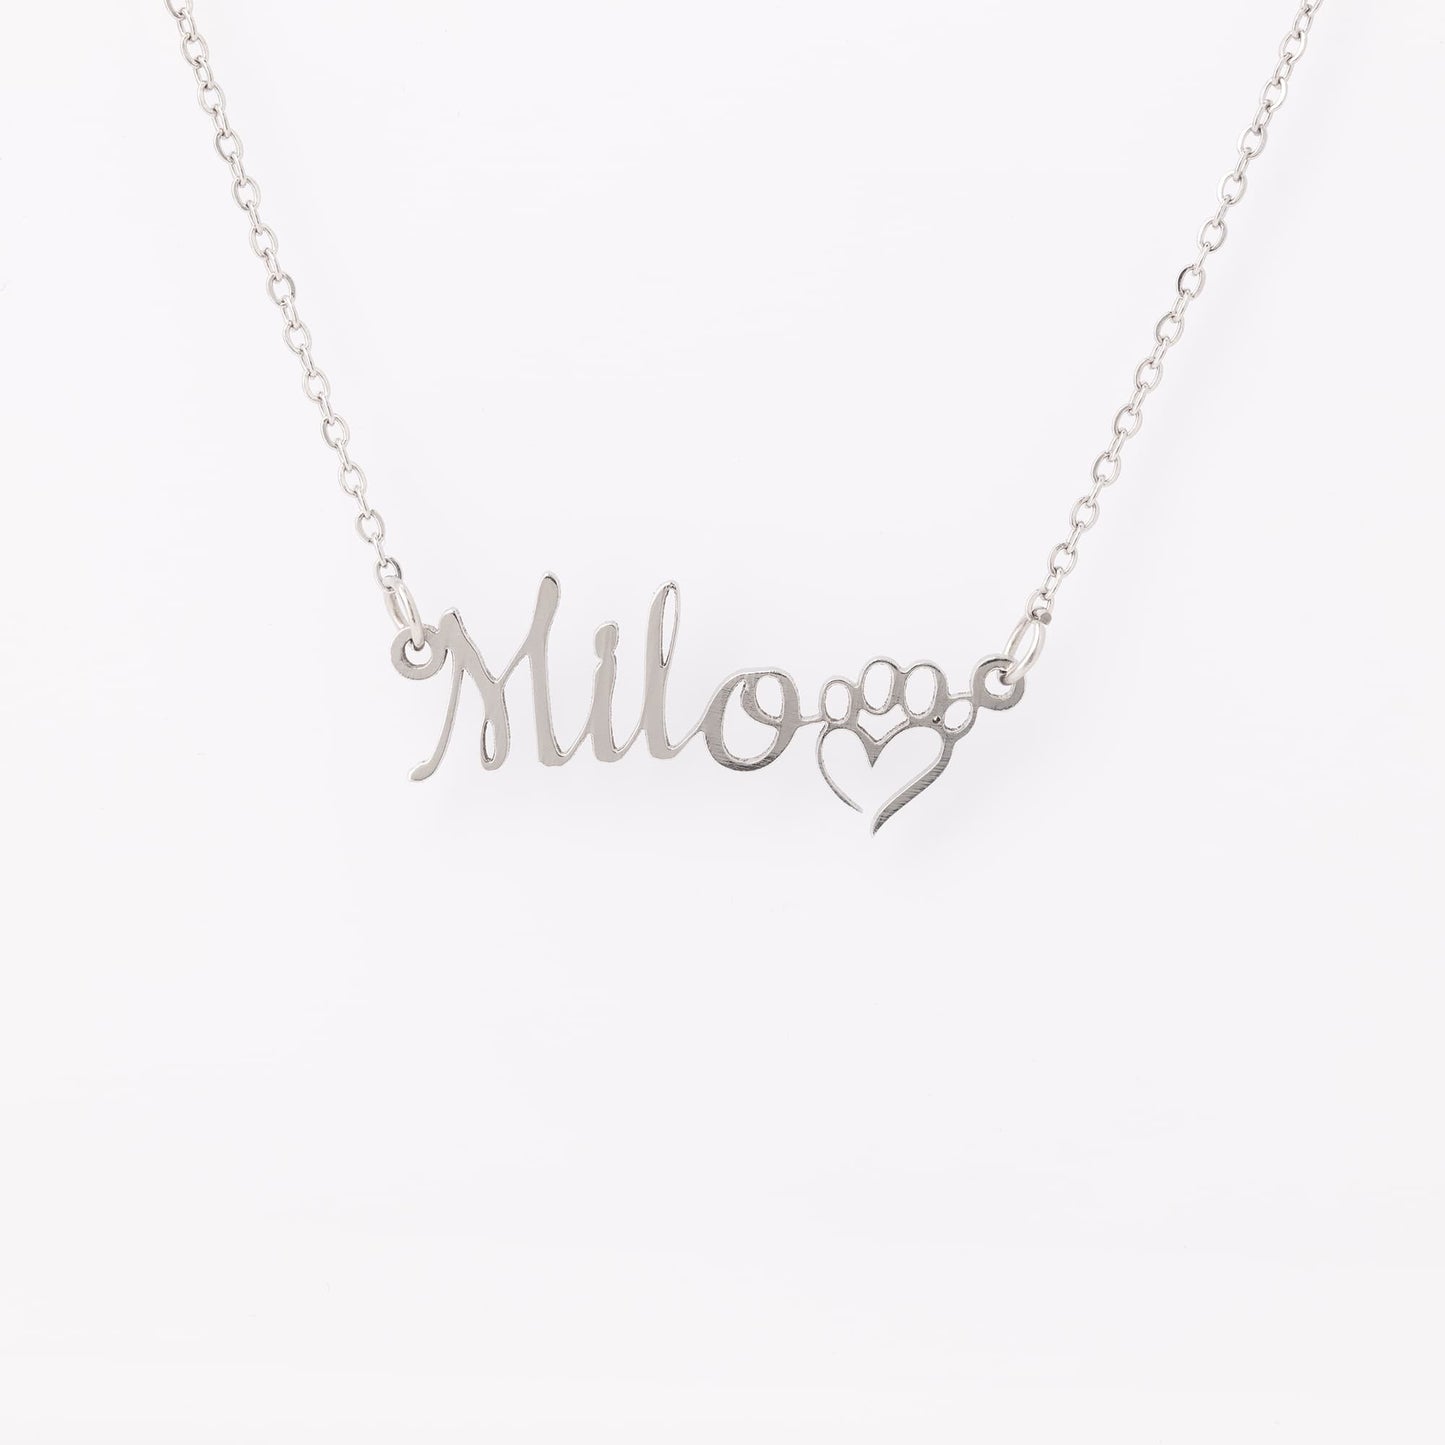 Dog Mom Name Necklace - Thoughtful and Personalized Gift for Pet Parents, Ecofriendly